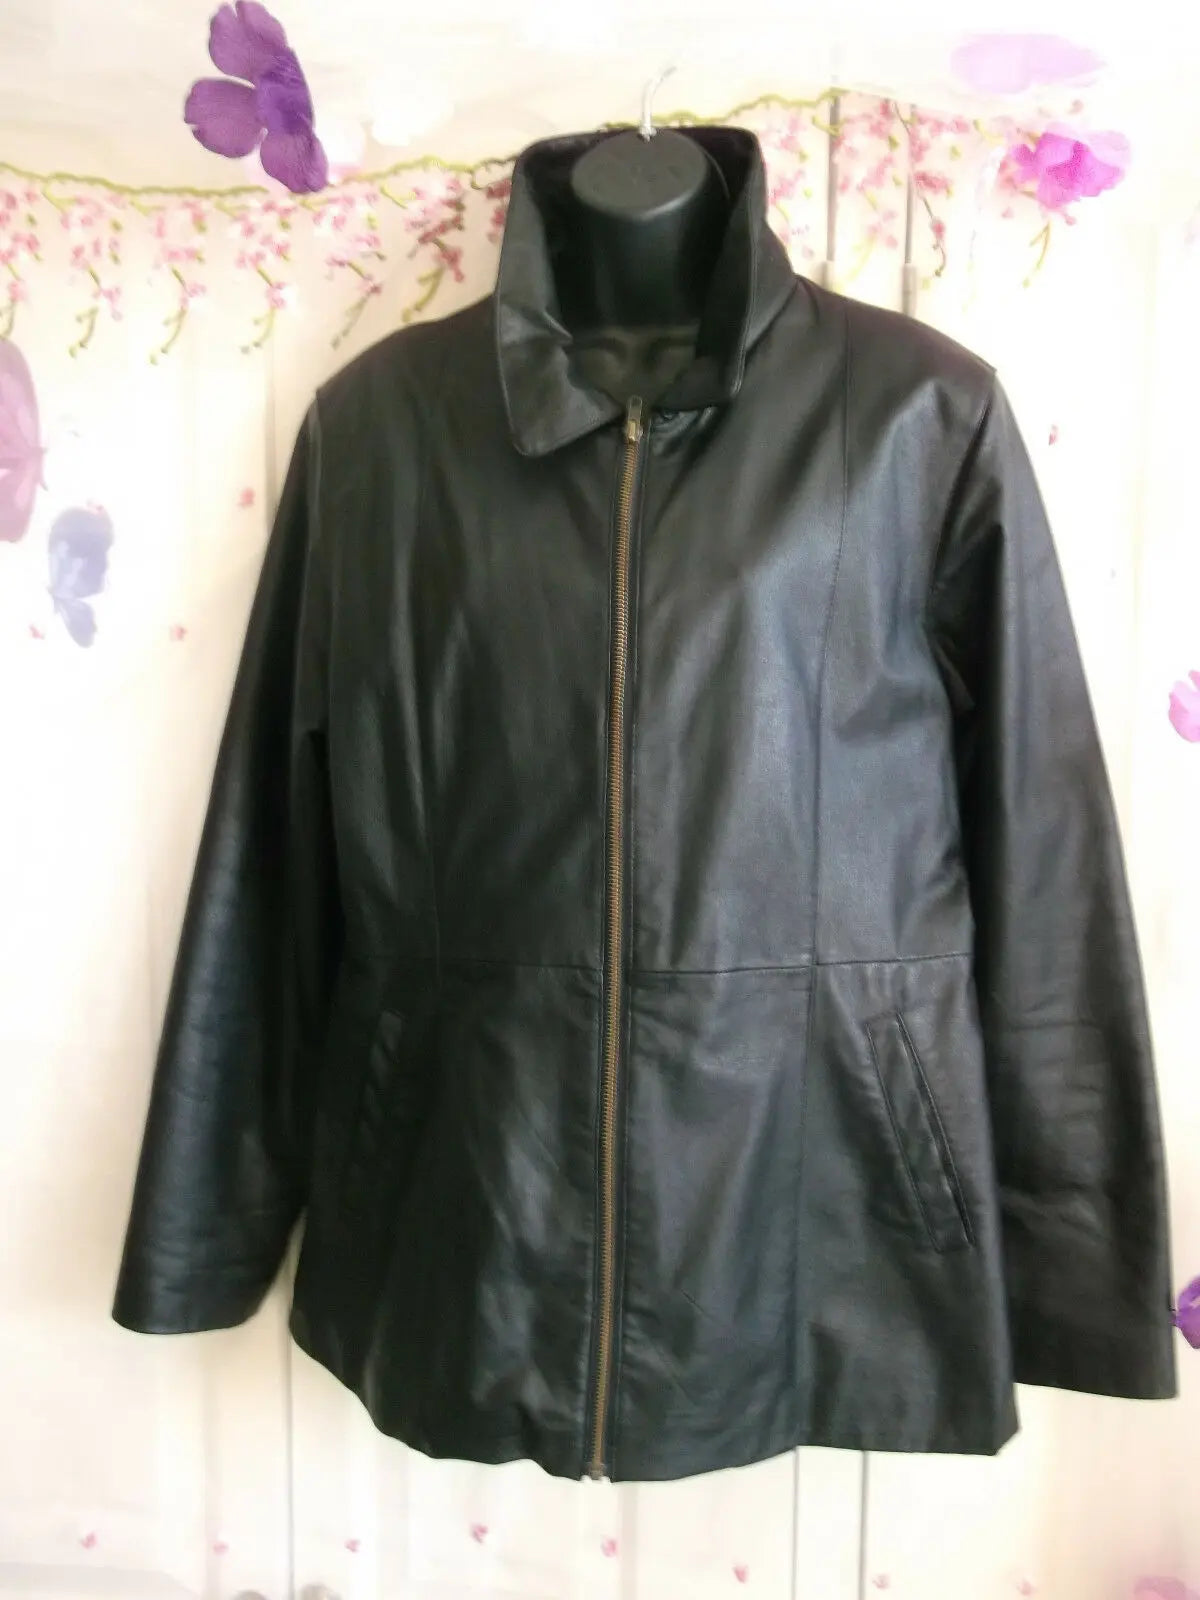 Stunning, Black leather coat 3/4 length,zip front,size 12.Bust 43".excellent con Unbranded